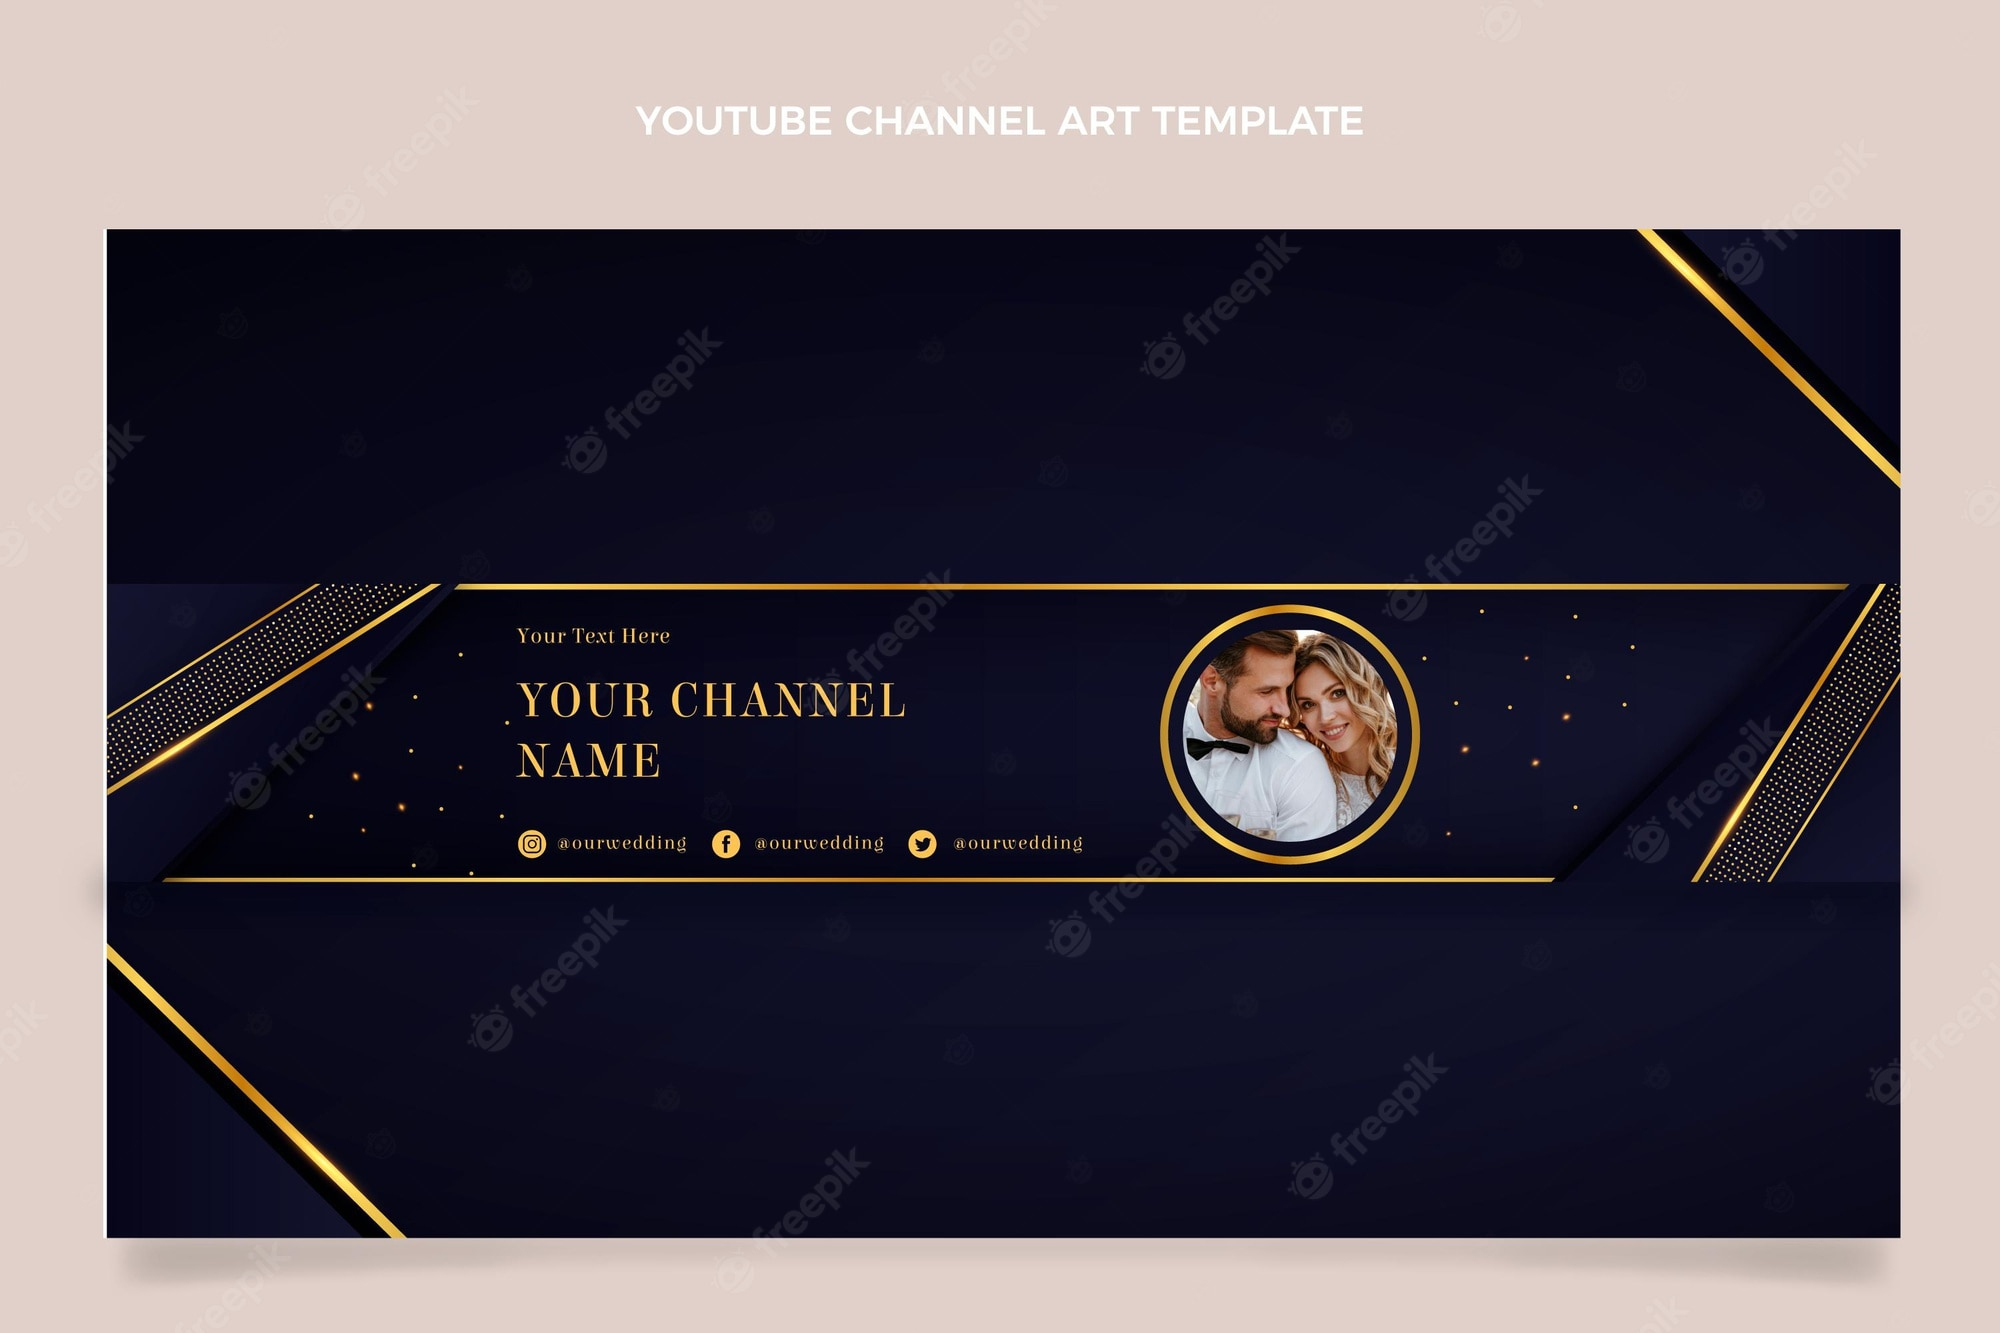 Youtube Channel Banner Template – Free Vectors & PSD Download Intended For Yt Banner Template